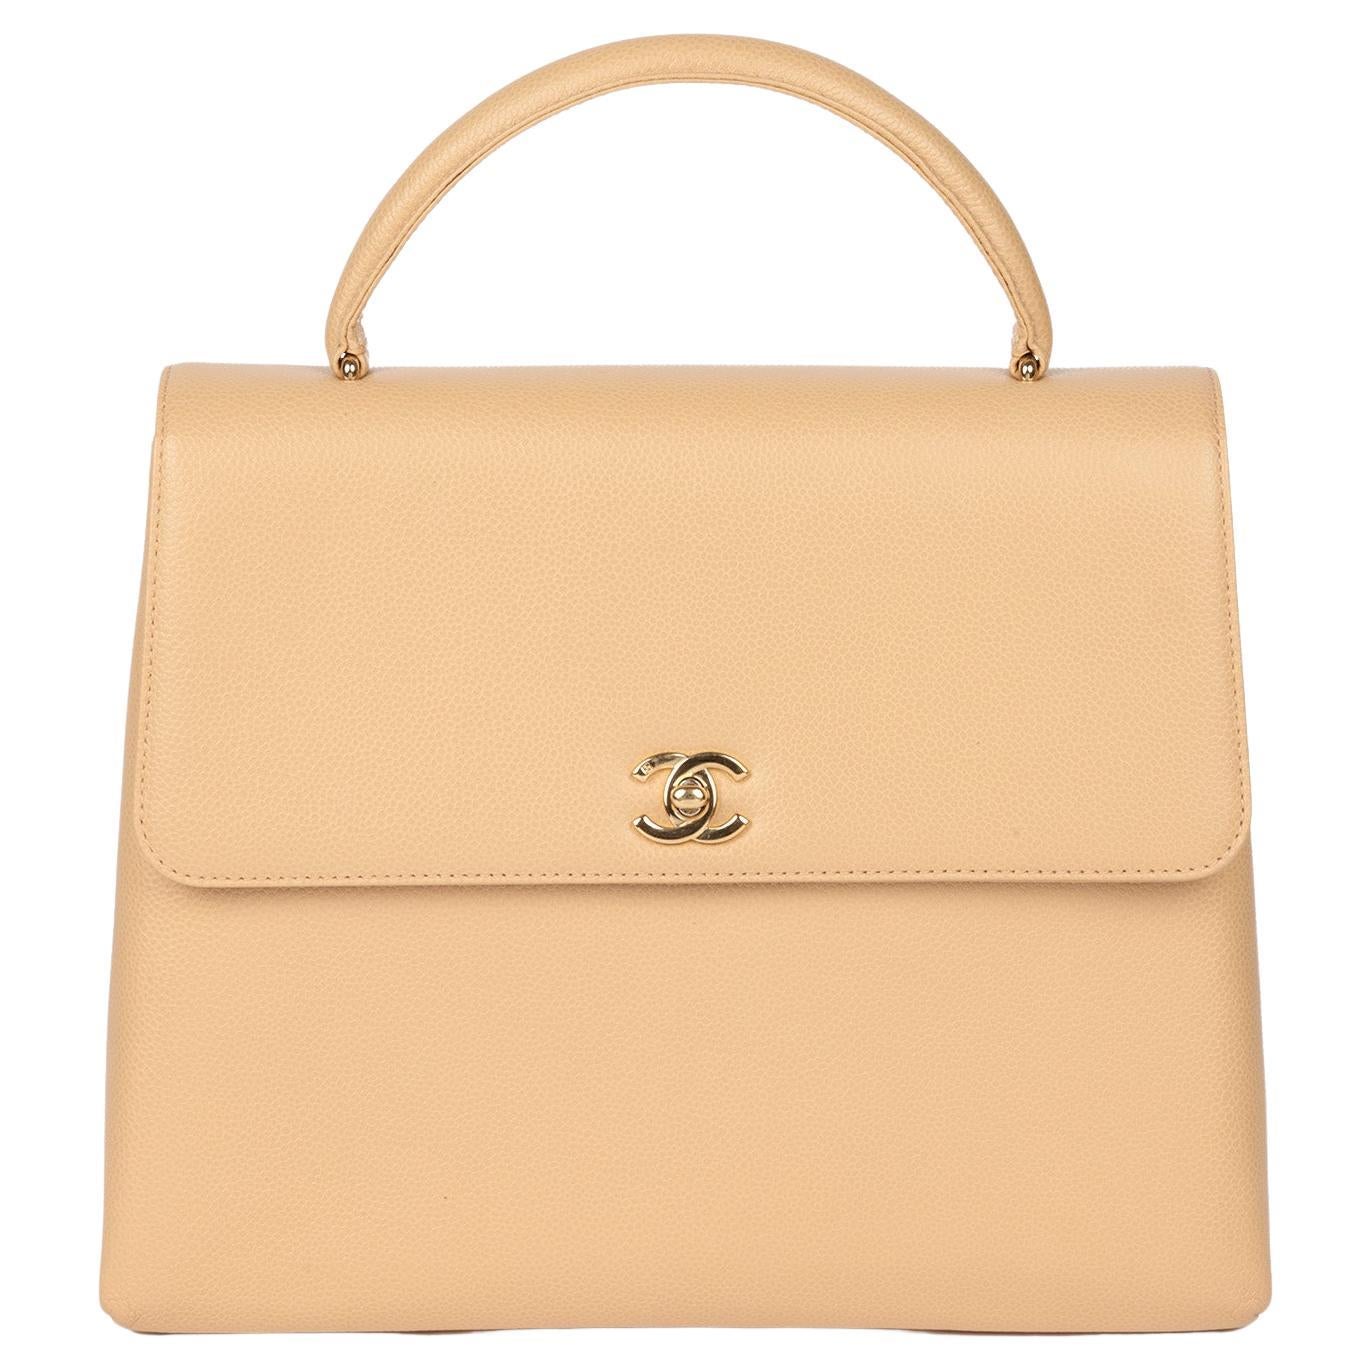 Chanel Beige Caviar Leather Vintage Classic Kelly